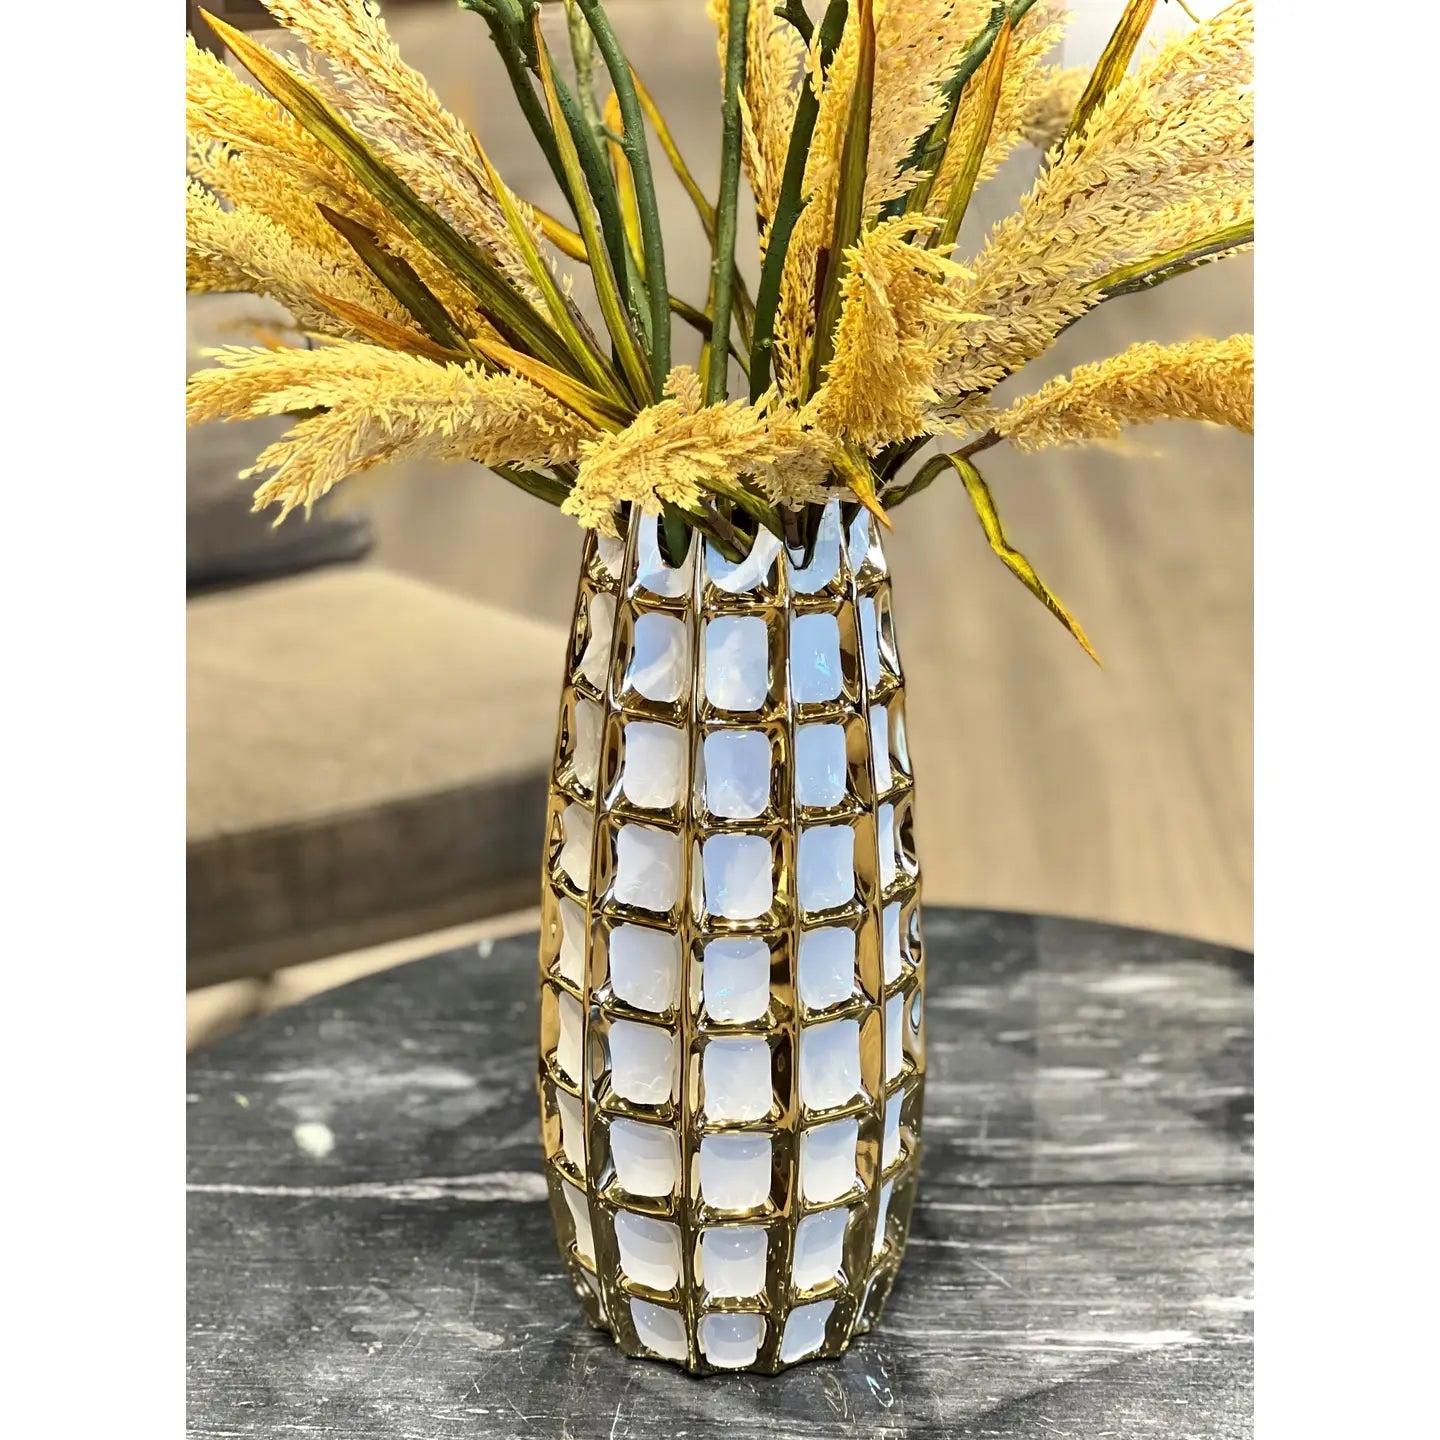 White and Gold Square Design Decorative Vase Vases High Class Touch - Home Decor 